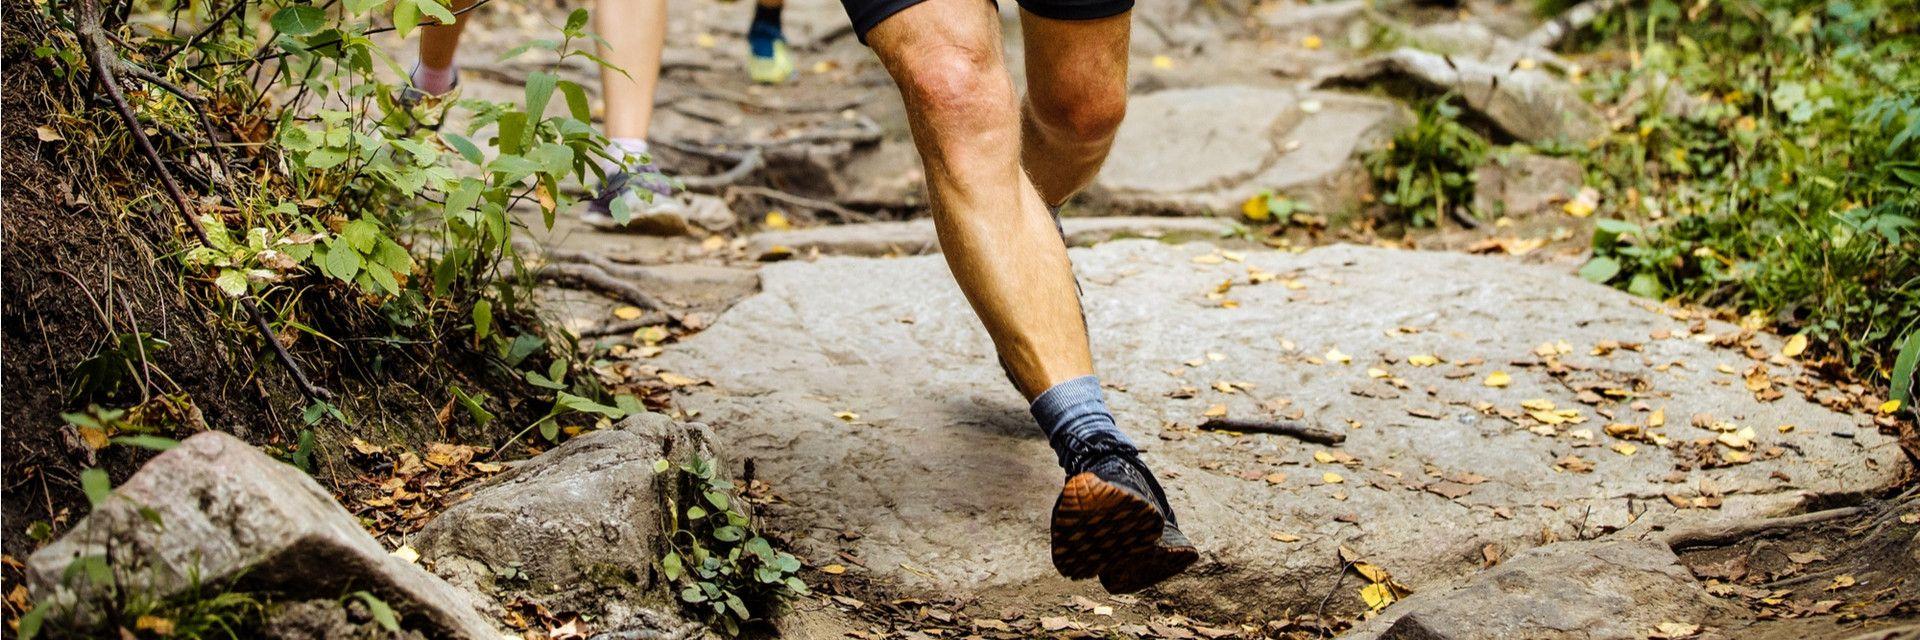 for Trail Runners near Princeton: How to Avoid a Sprained Ankle | Orthopaedic Institute